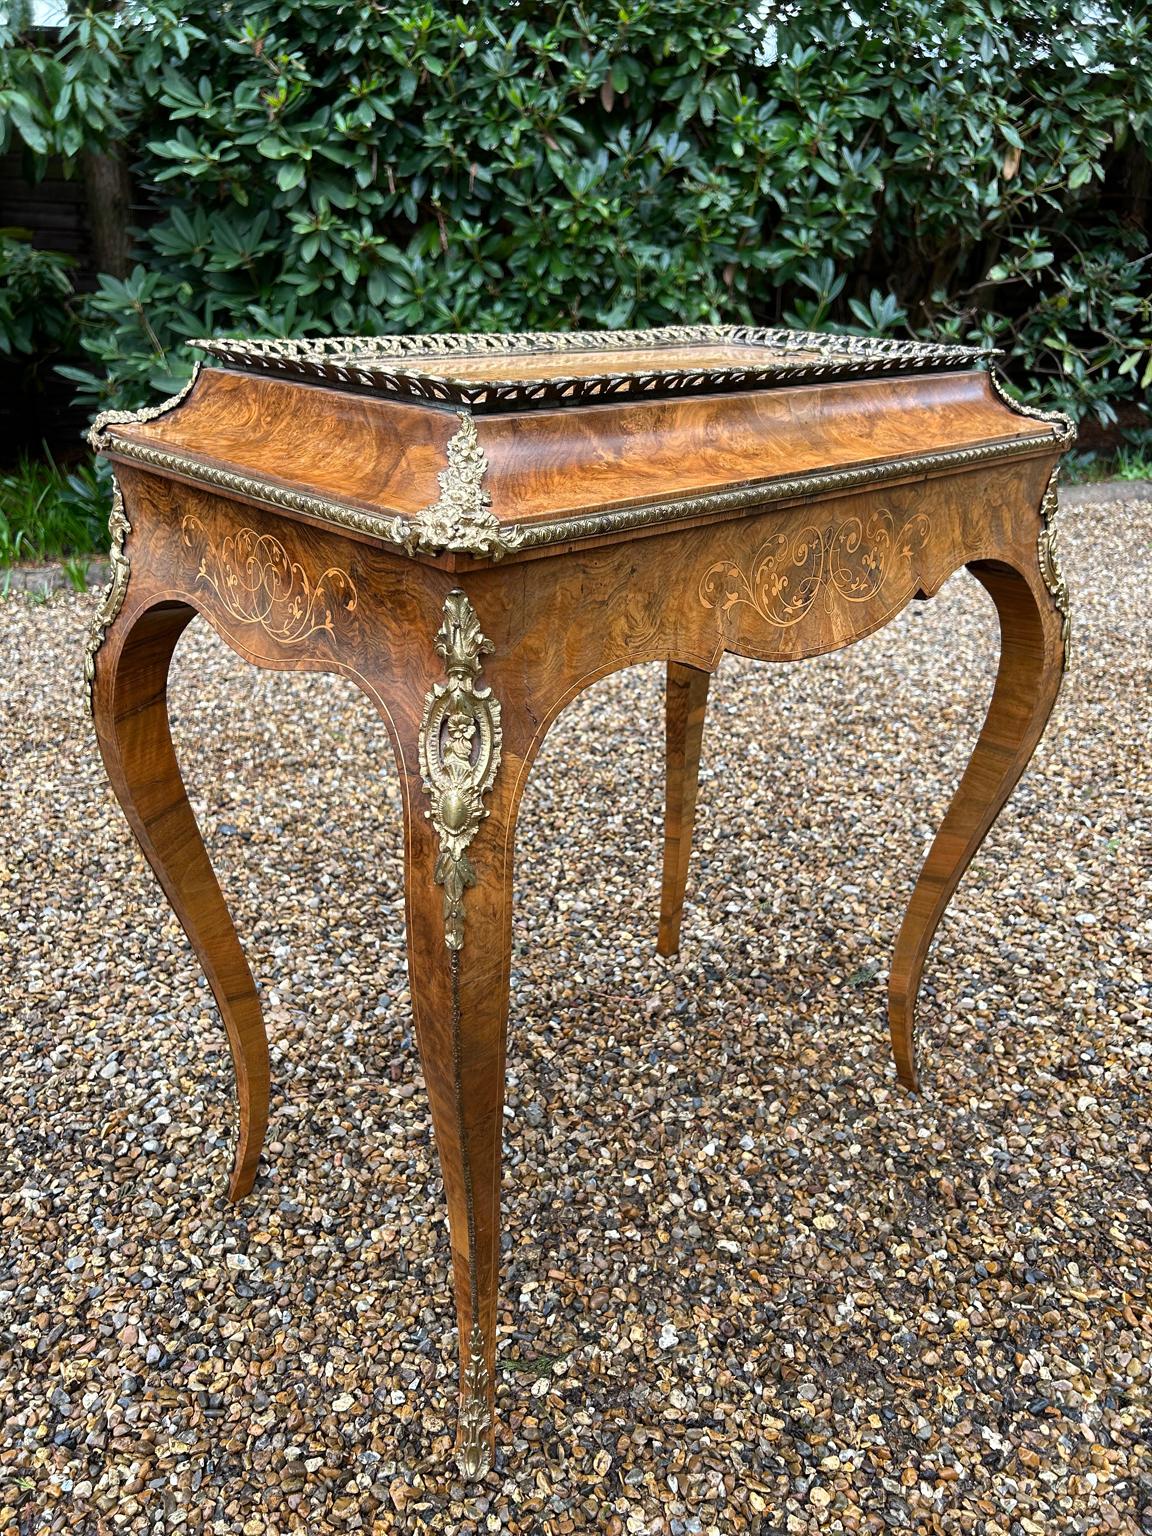 19th Century French Burr Walnut and Marquetry Jardiniere 1